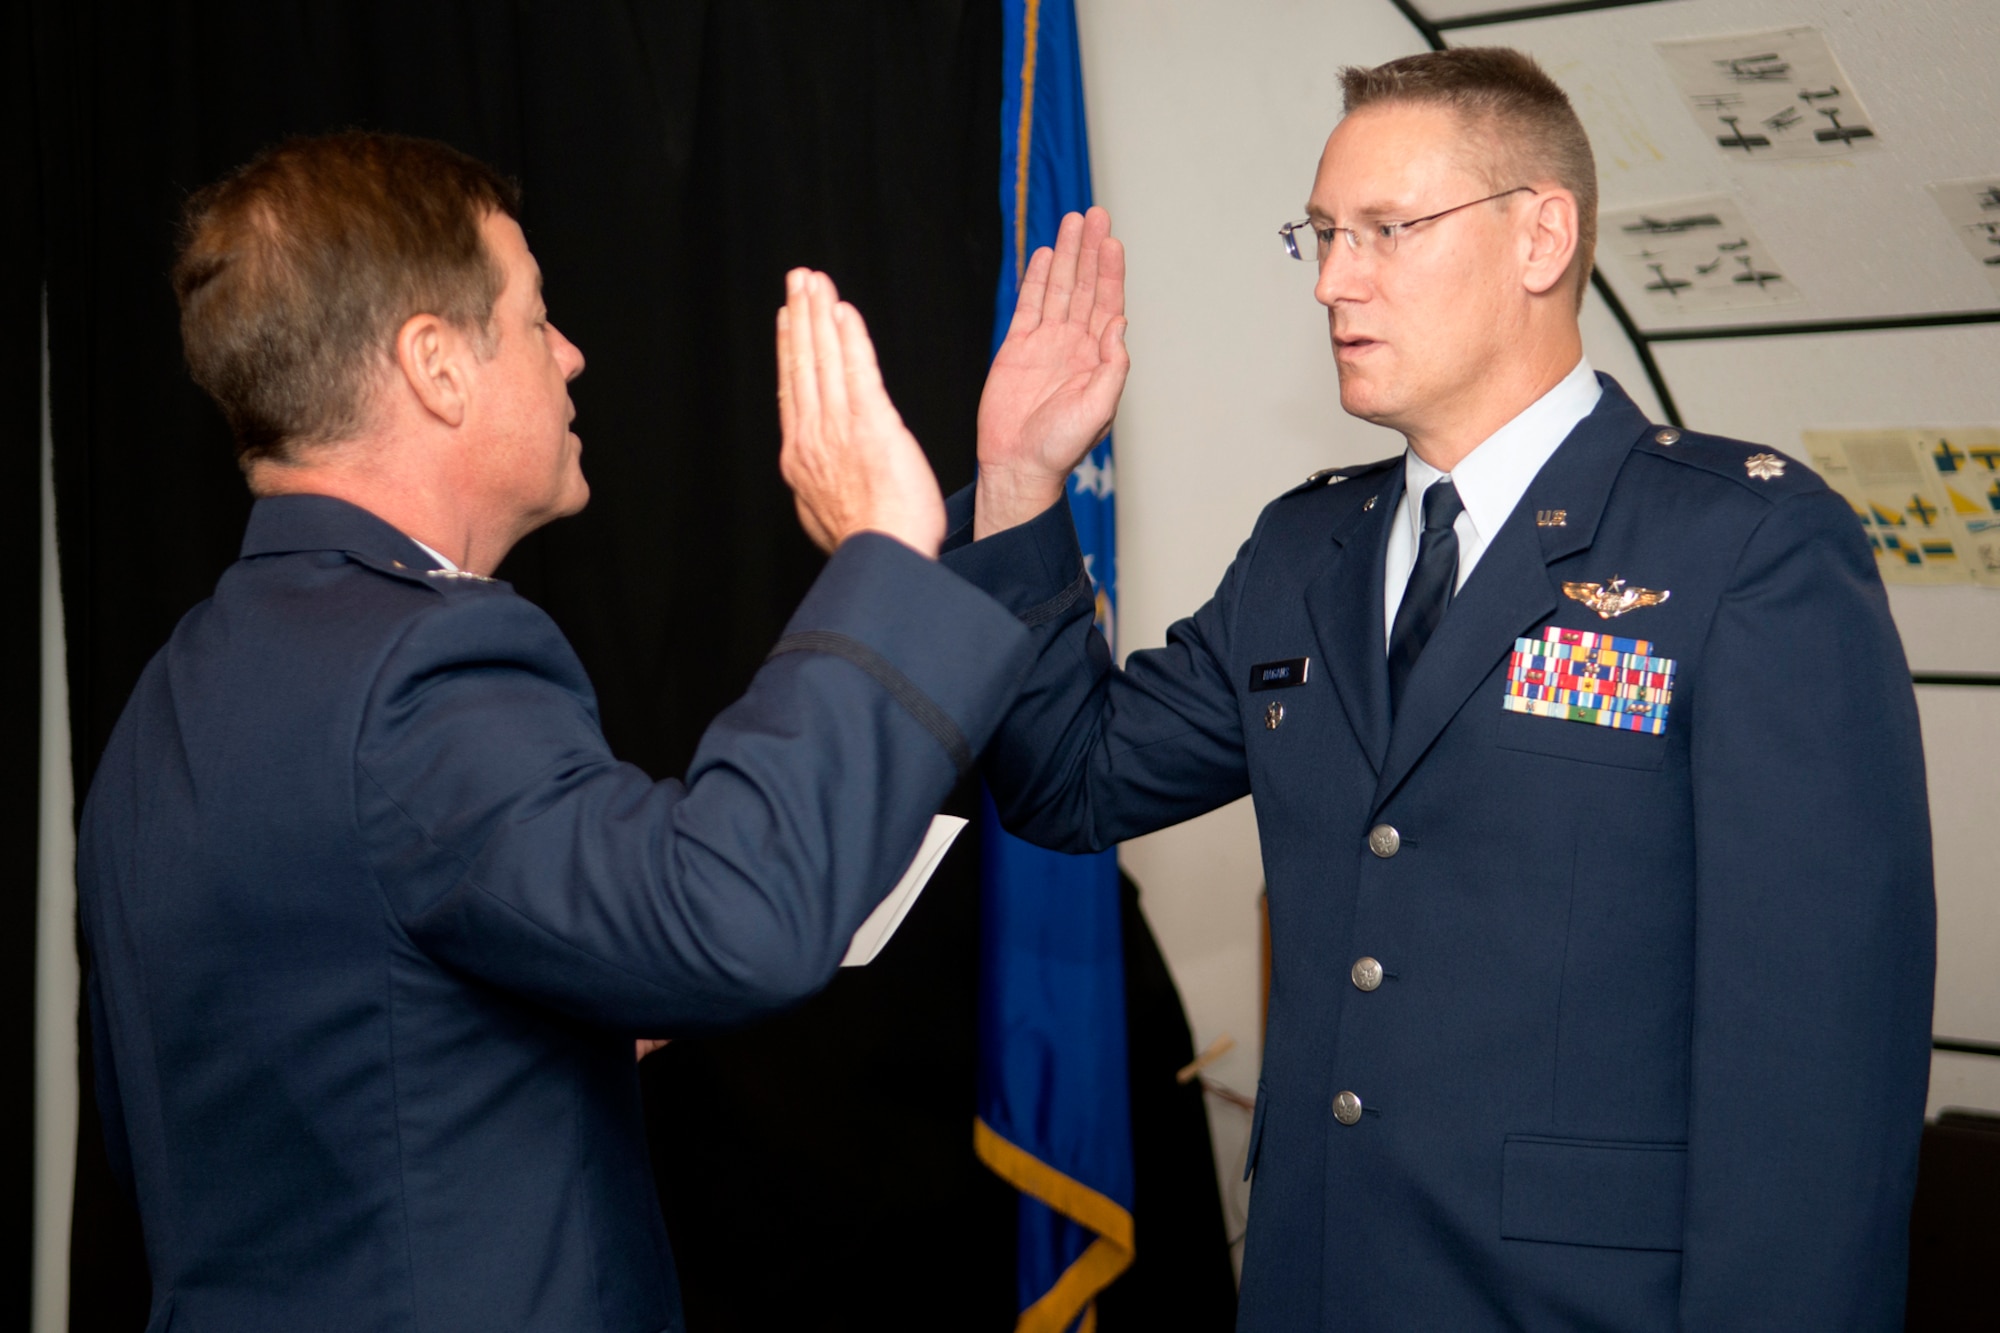 U.S. Air Force Lt. Col. Joseph Hagans (right) recites the oath from Col. Keith Schultz, 307th Bomb Wing commander, during a Pinning On ceremony, Sept. 28, 2012, Barksdale Air Force Base, La. Hagan was is a reservist assigned to the 343rd Bomb Squadron at Barksdale. (U.S. Air Force photo by Master Sgt. Greg Steele/Released)